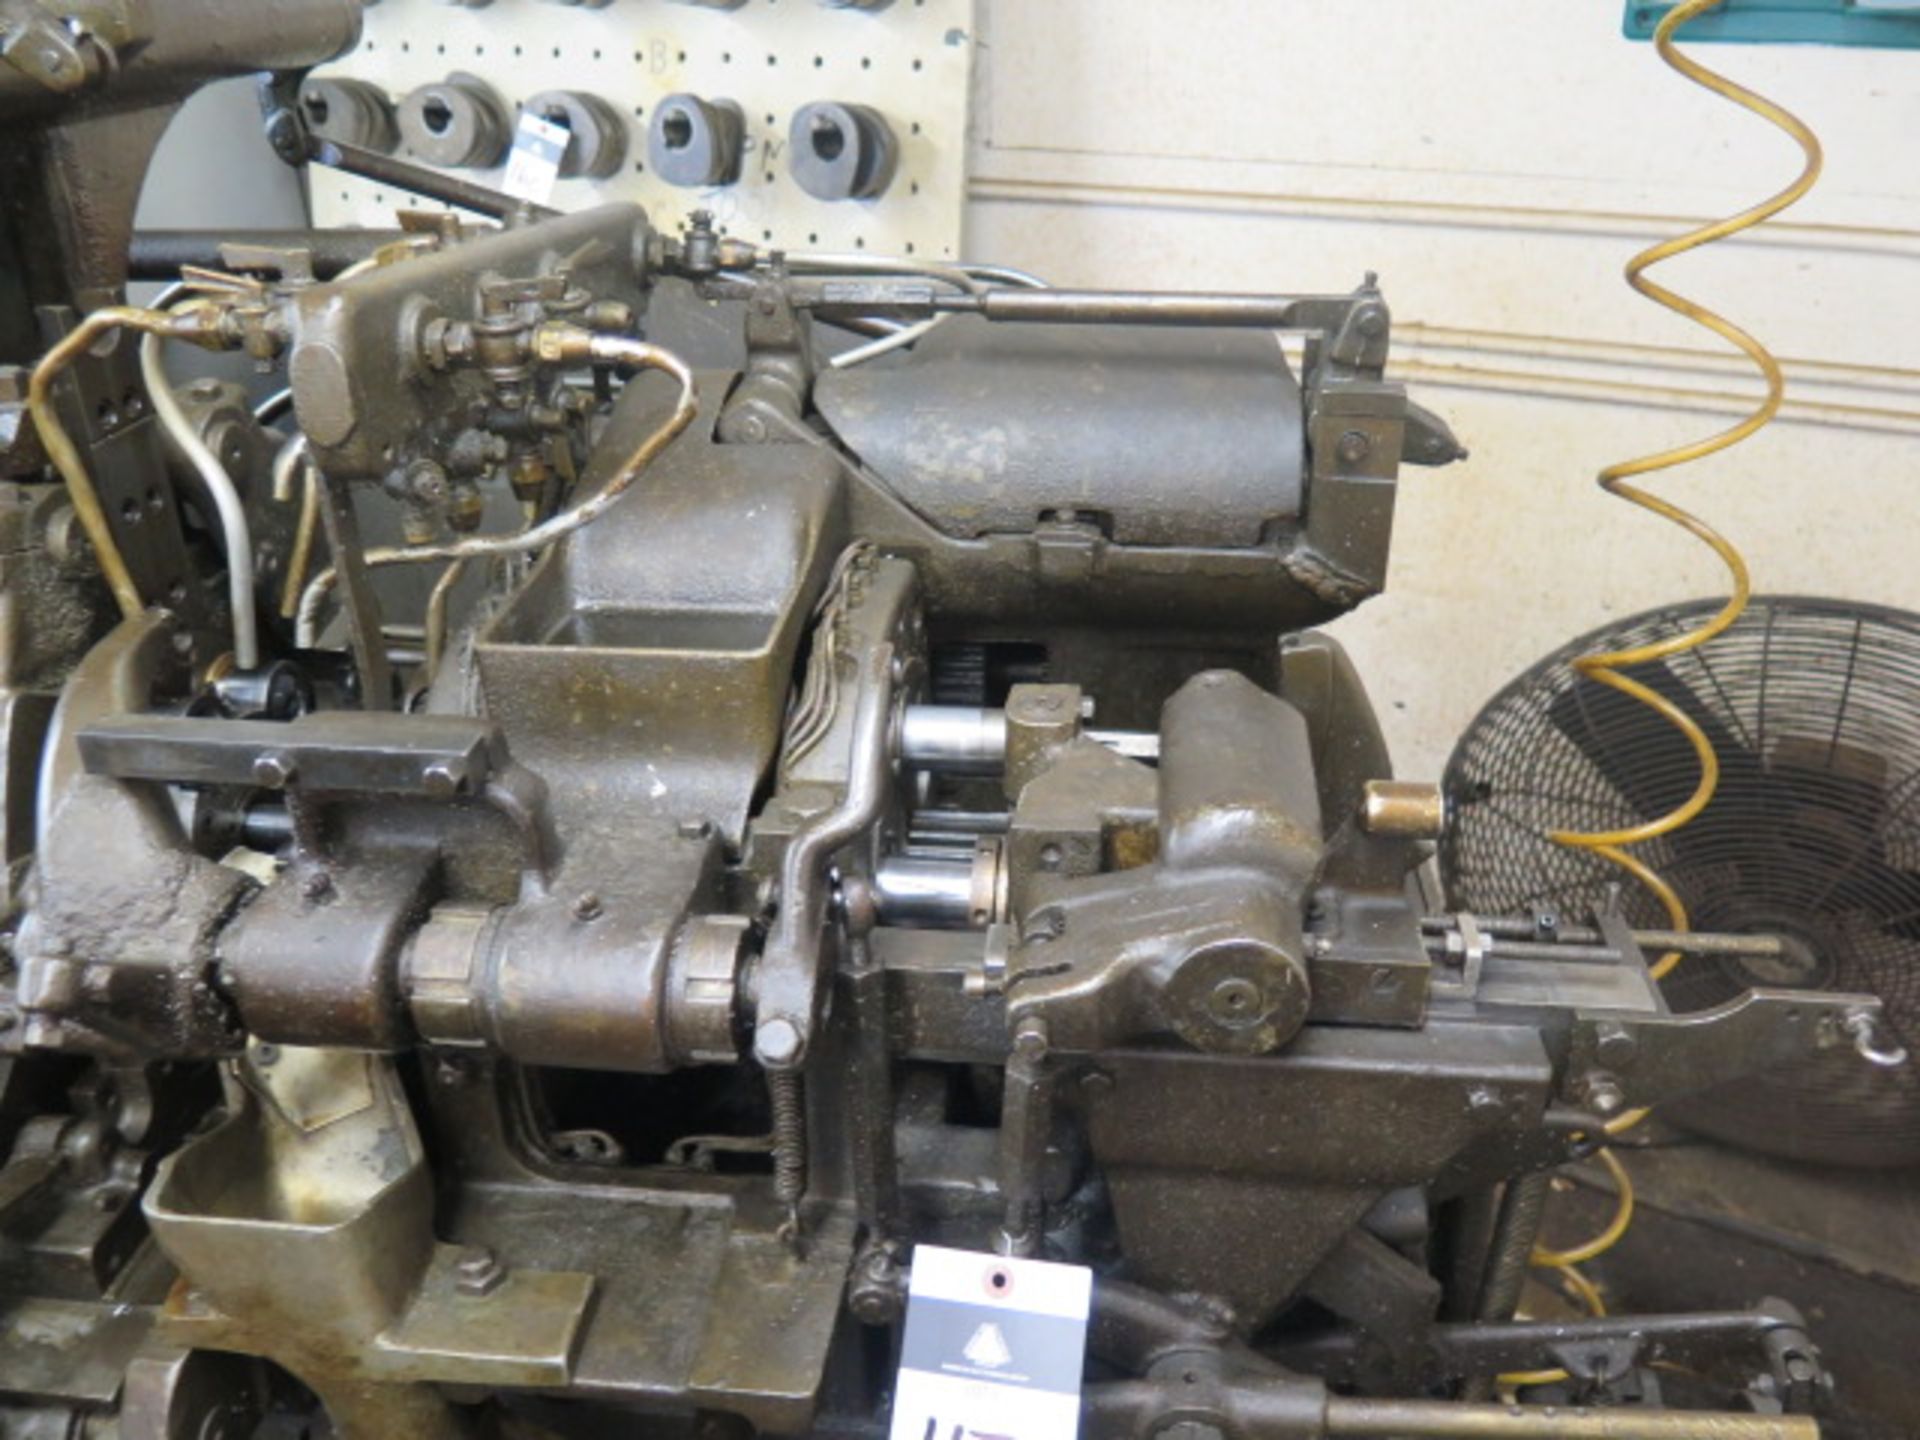 Davenport mdl. B 5-Spindle Automatic Screw Machine s/n 5732 w/ 5th Cross Slide Attachment (NO - Image 4 of 12